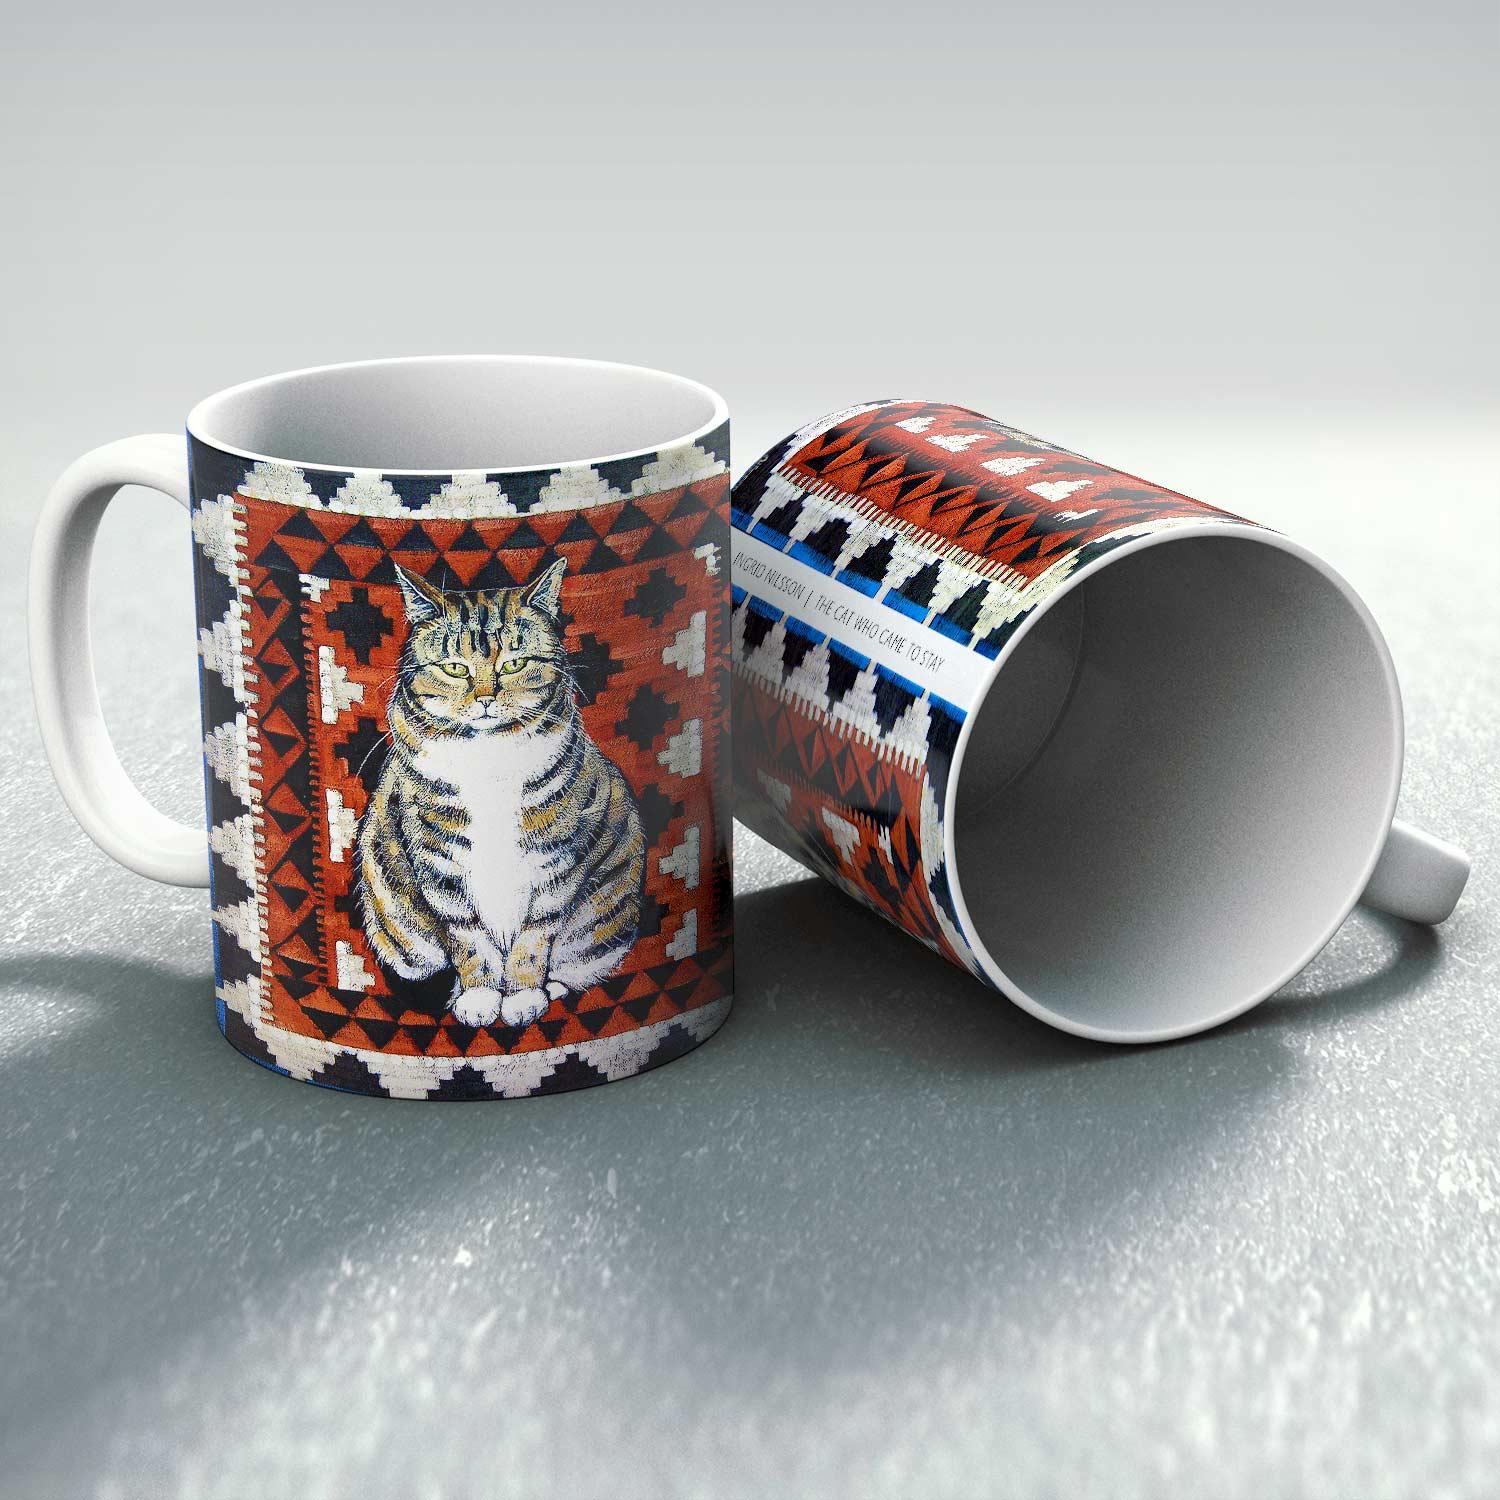 The Cat Who Came to Stay Mug from an original painting by artist Ingrid Nilsson